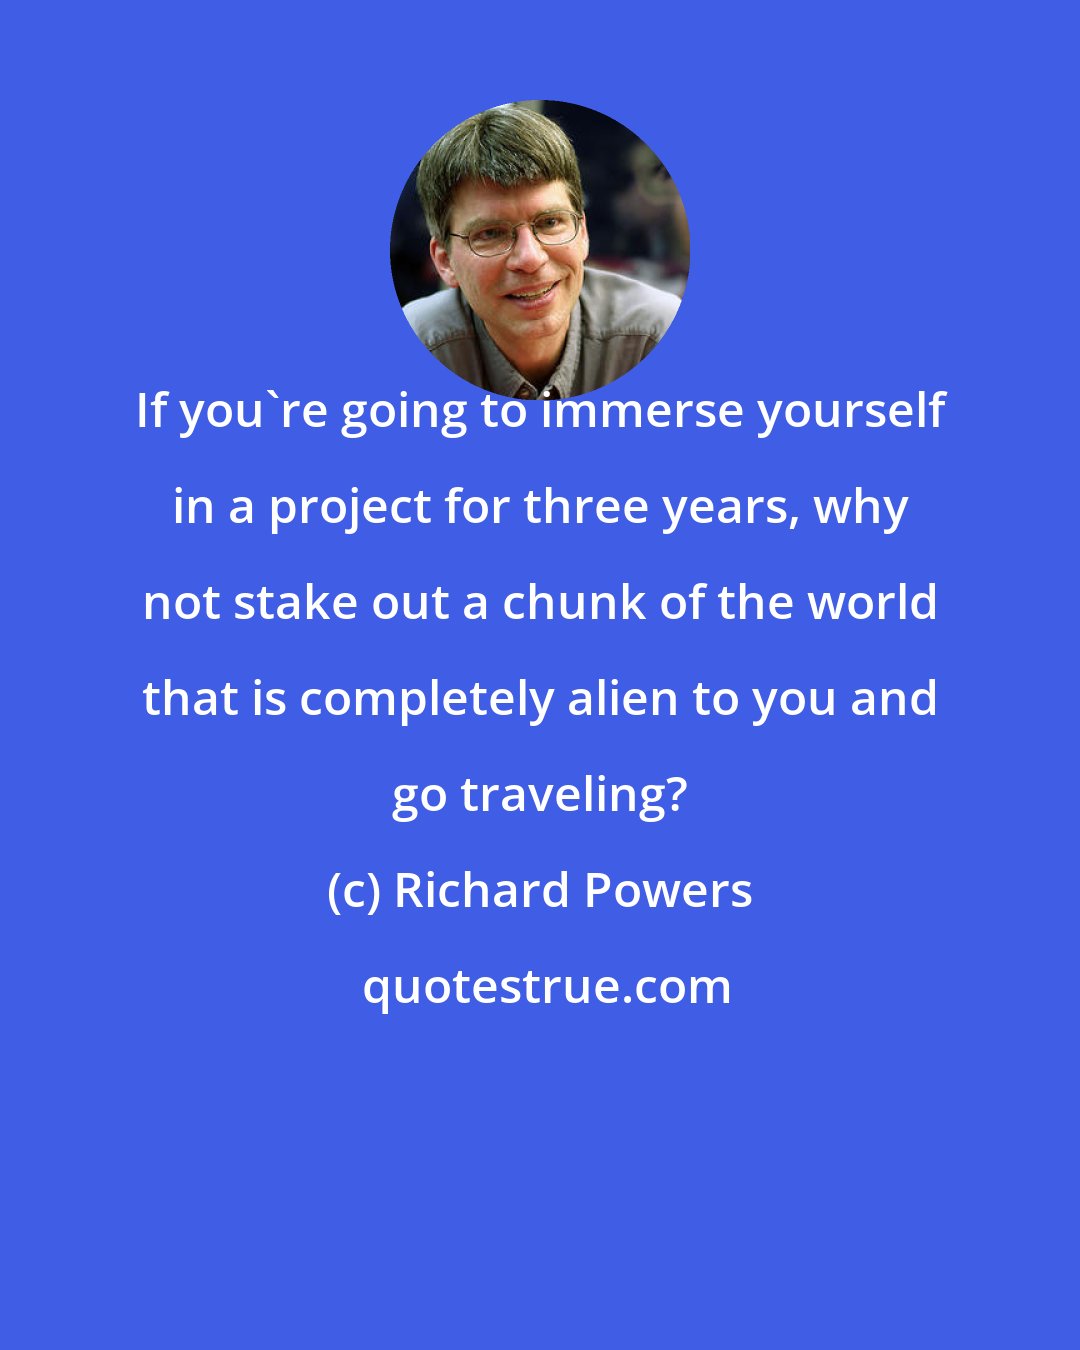 Richard Powers: If you're going to immerse yourself in a project for three years, why not stake out a chunk of the world that is completely alien to you and go traveling?